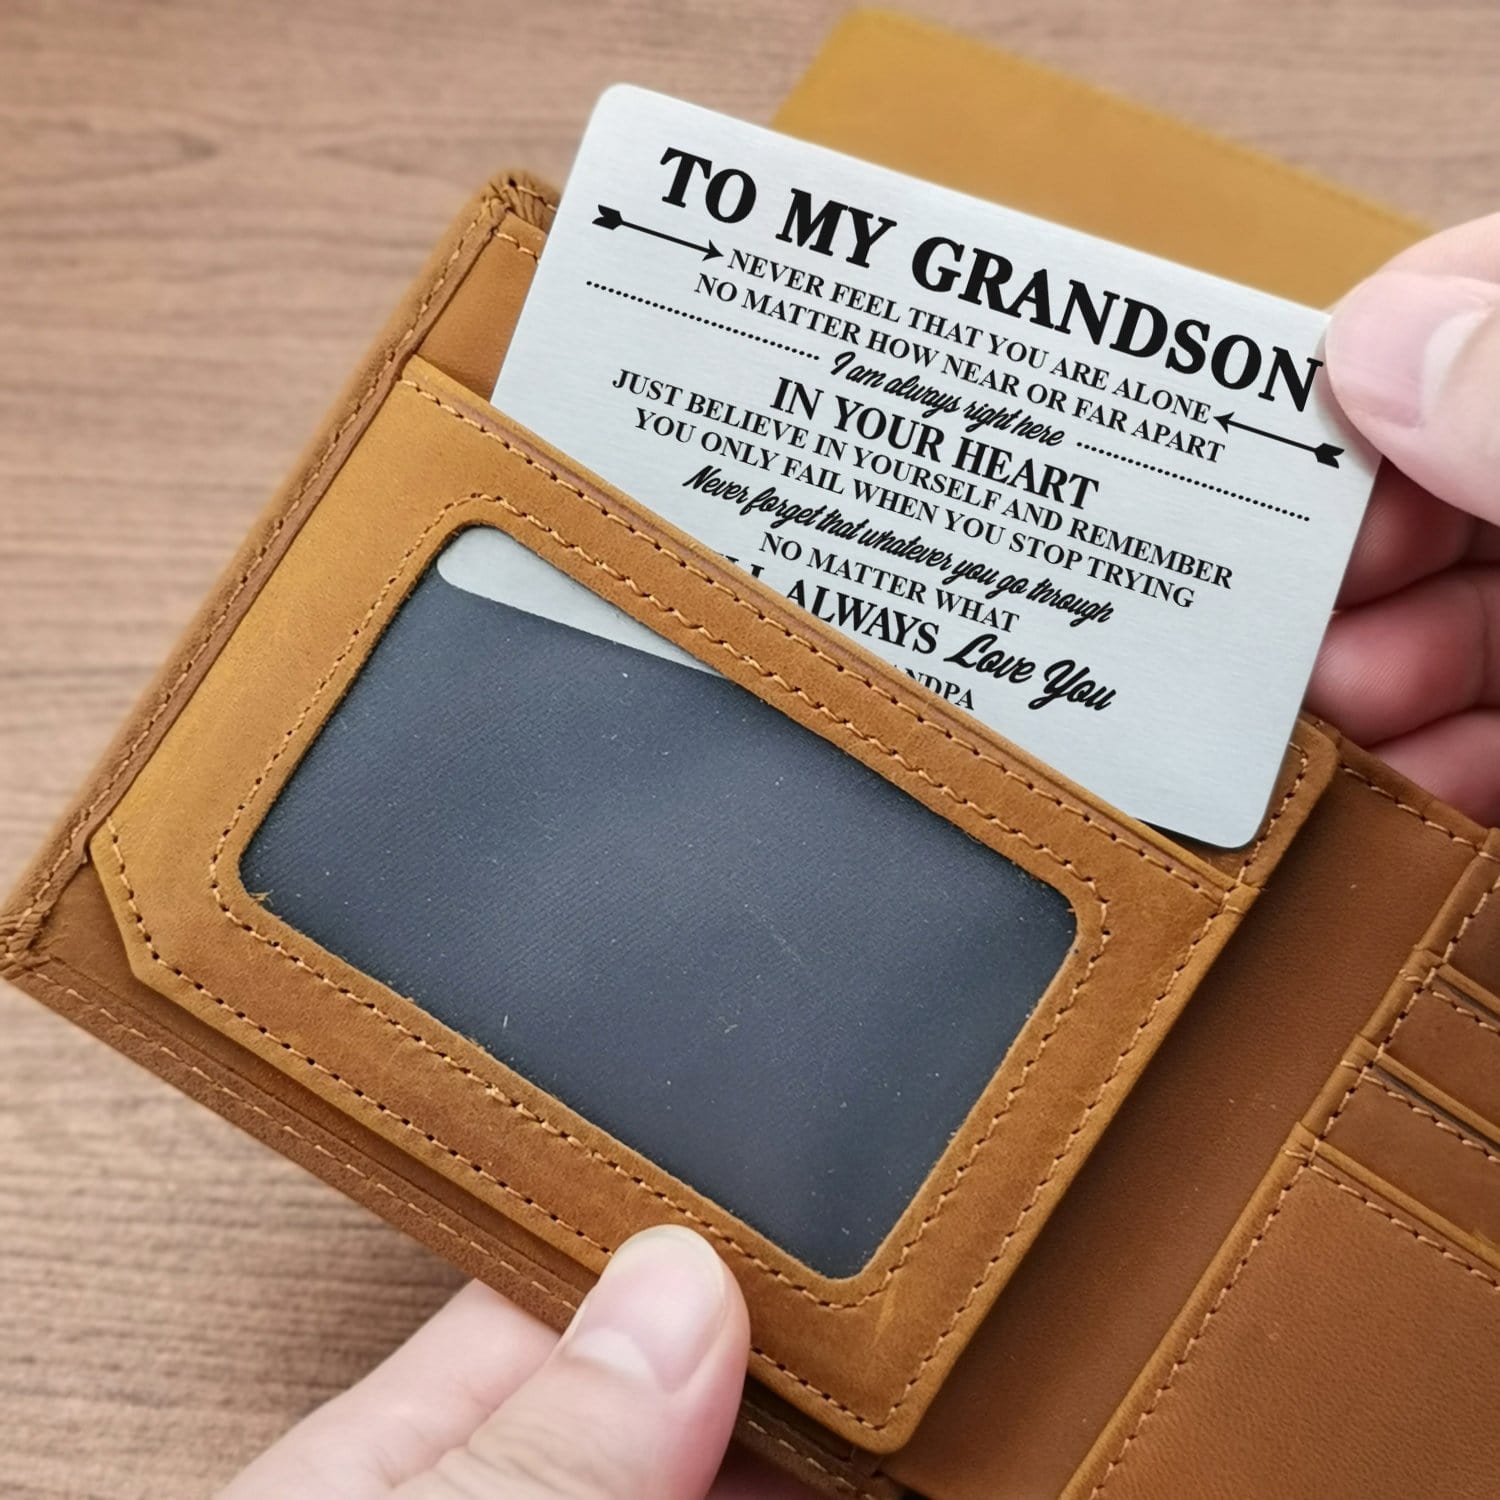 Wallets Grandpa To Grandson - I Will Always Love You Bifold Leather Wallet Gift Card GiveMe-Gifts